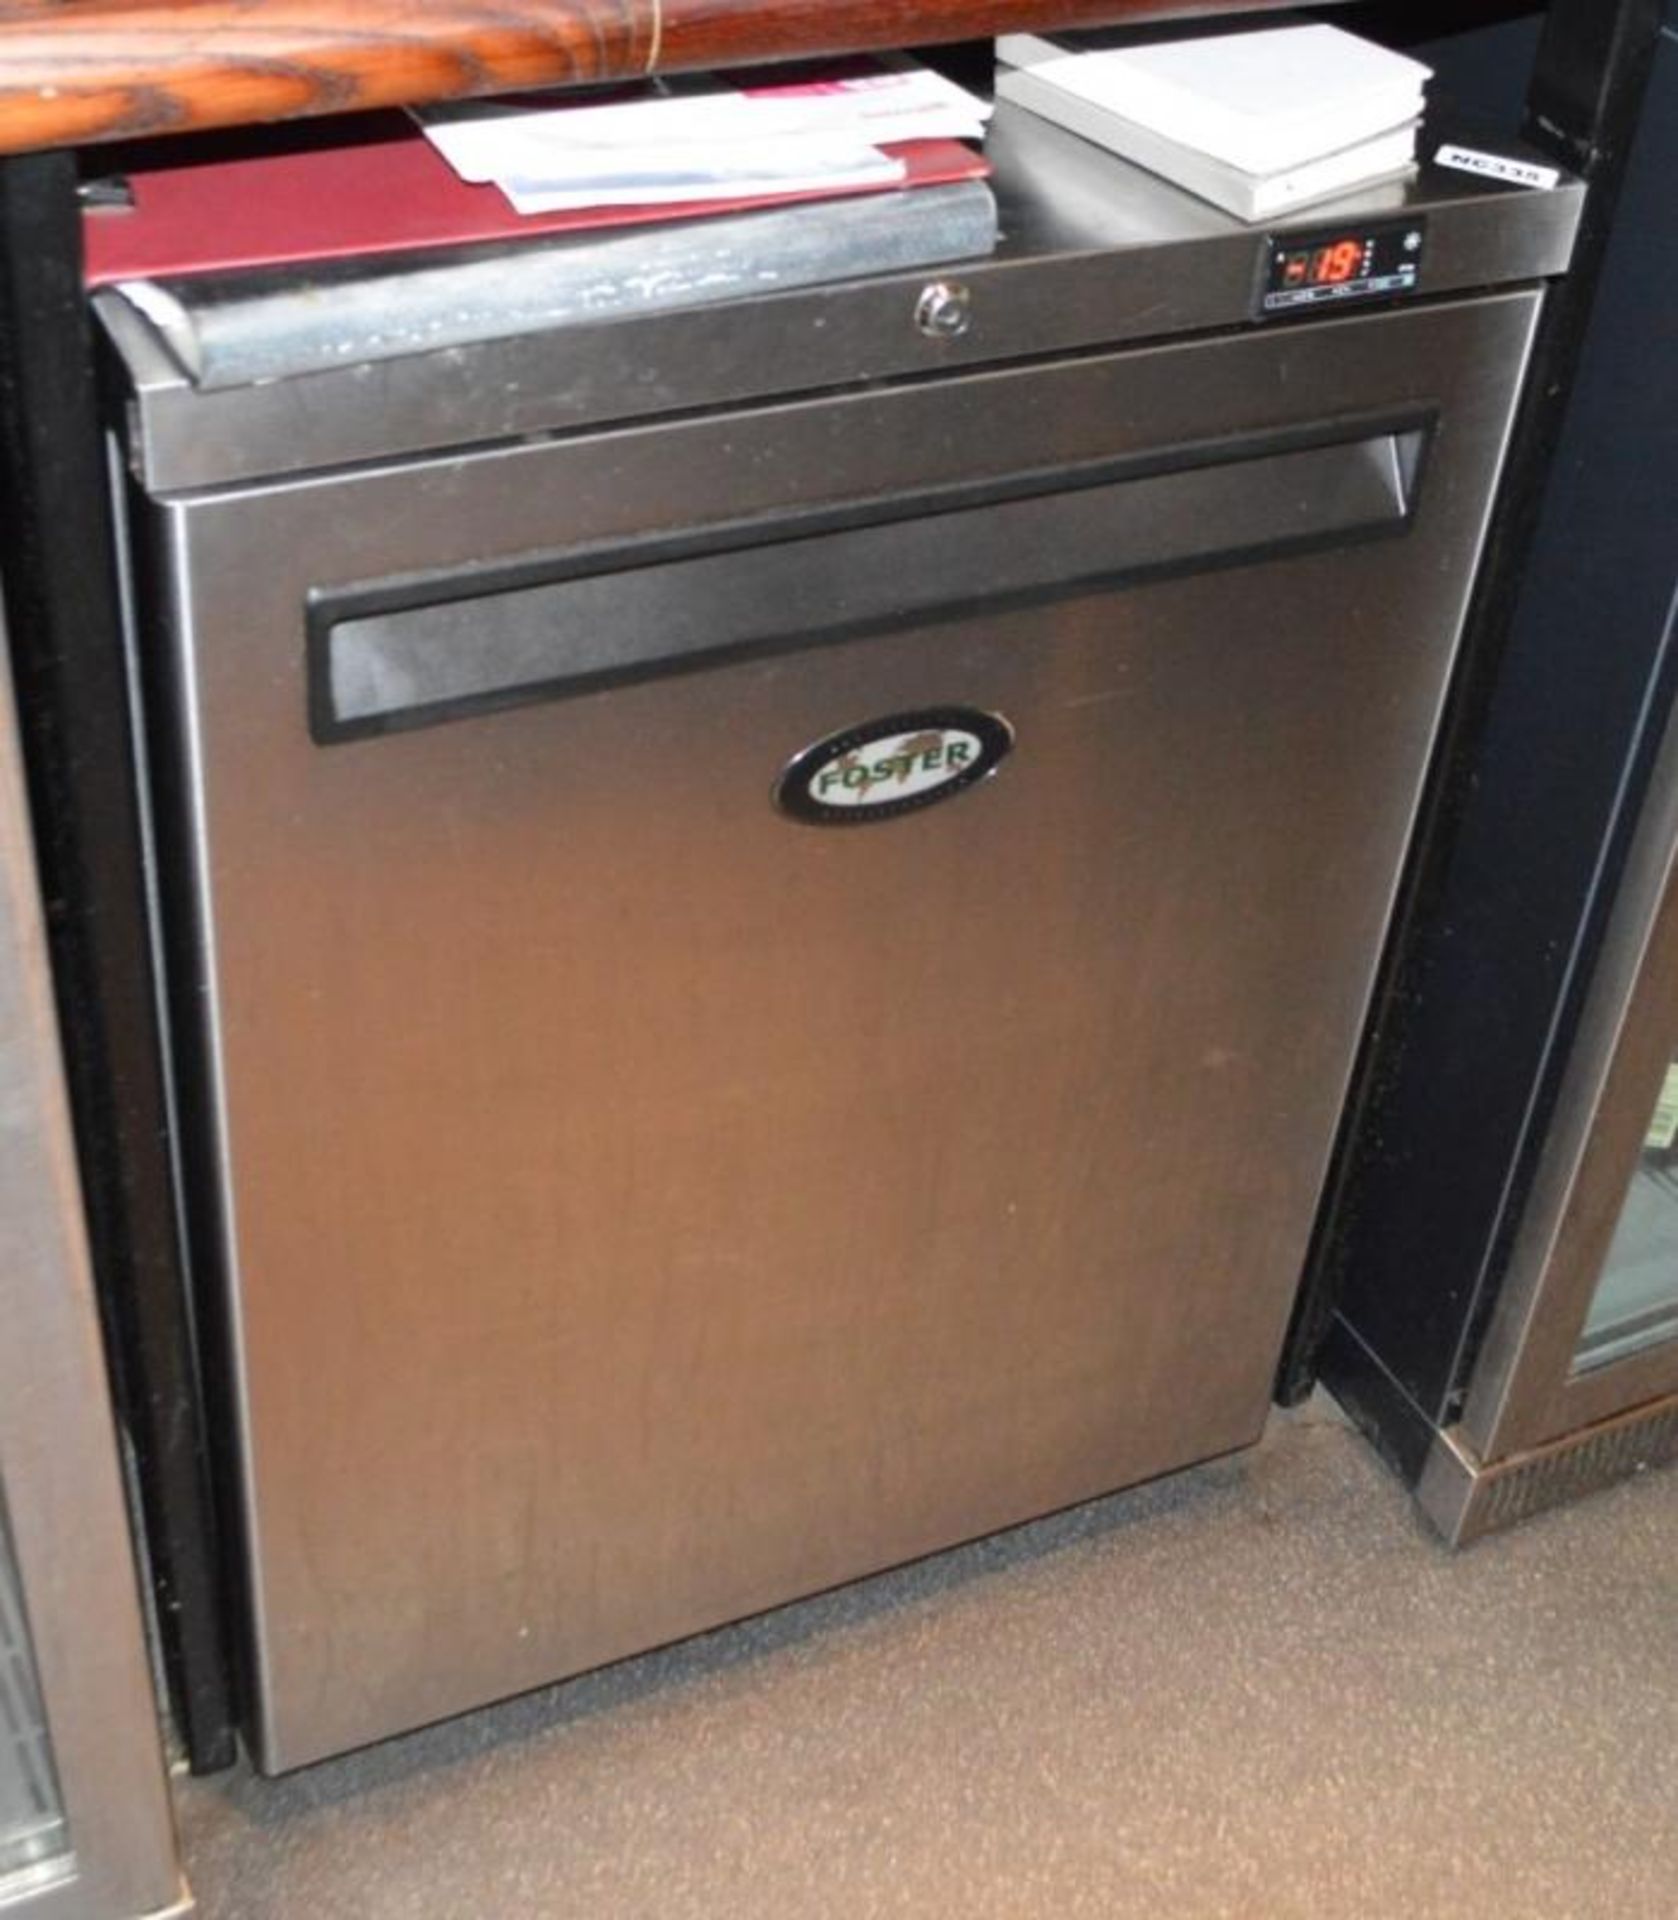 1 x Foster Undercounter Single Door Refrigerator With Stainless Steel Finish - Model HR150-A - H80 x - Image 2 of 4